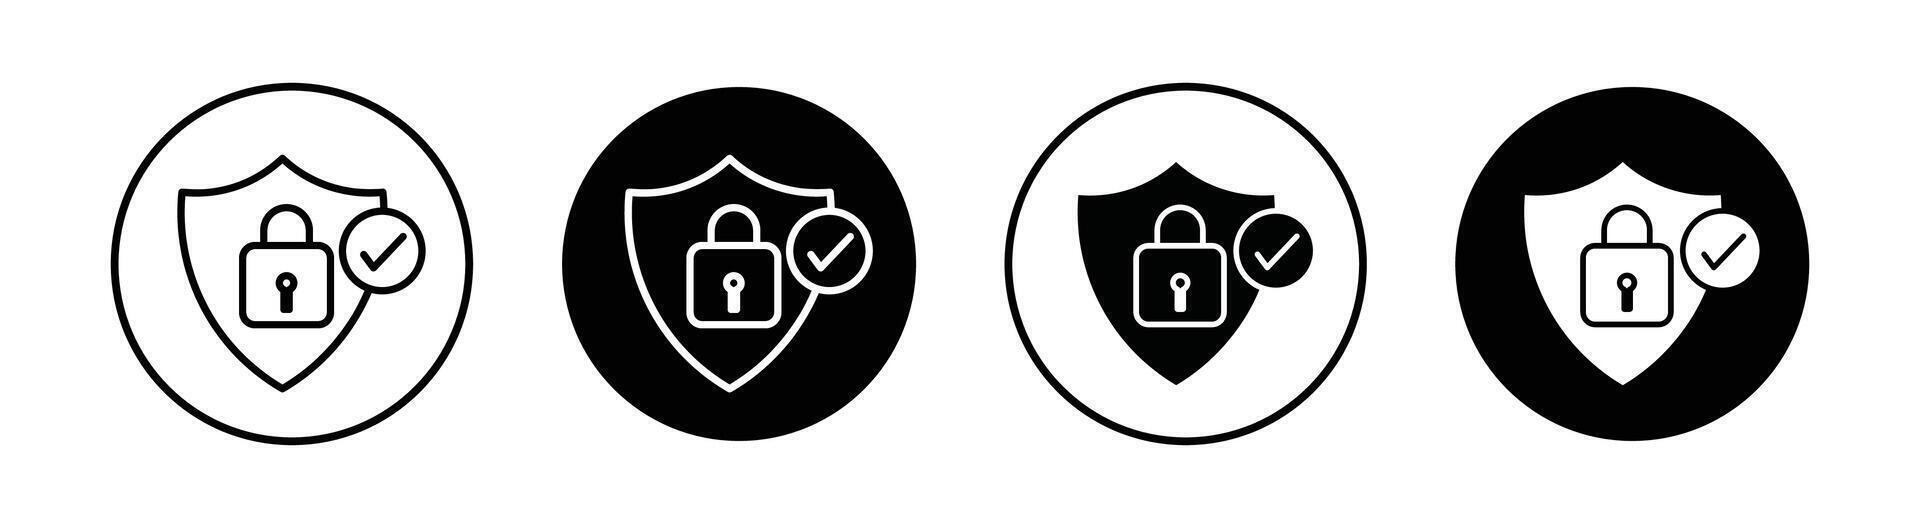 Secure vector icon